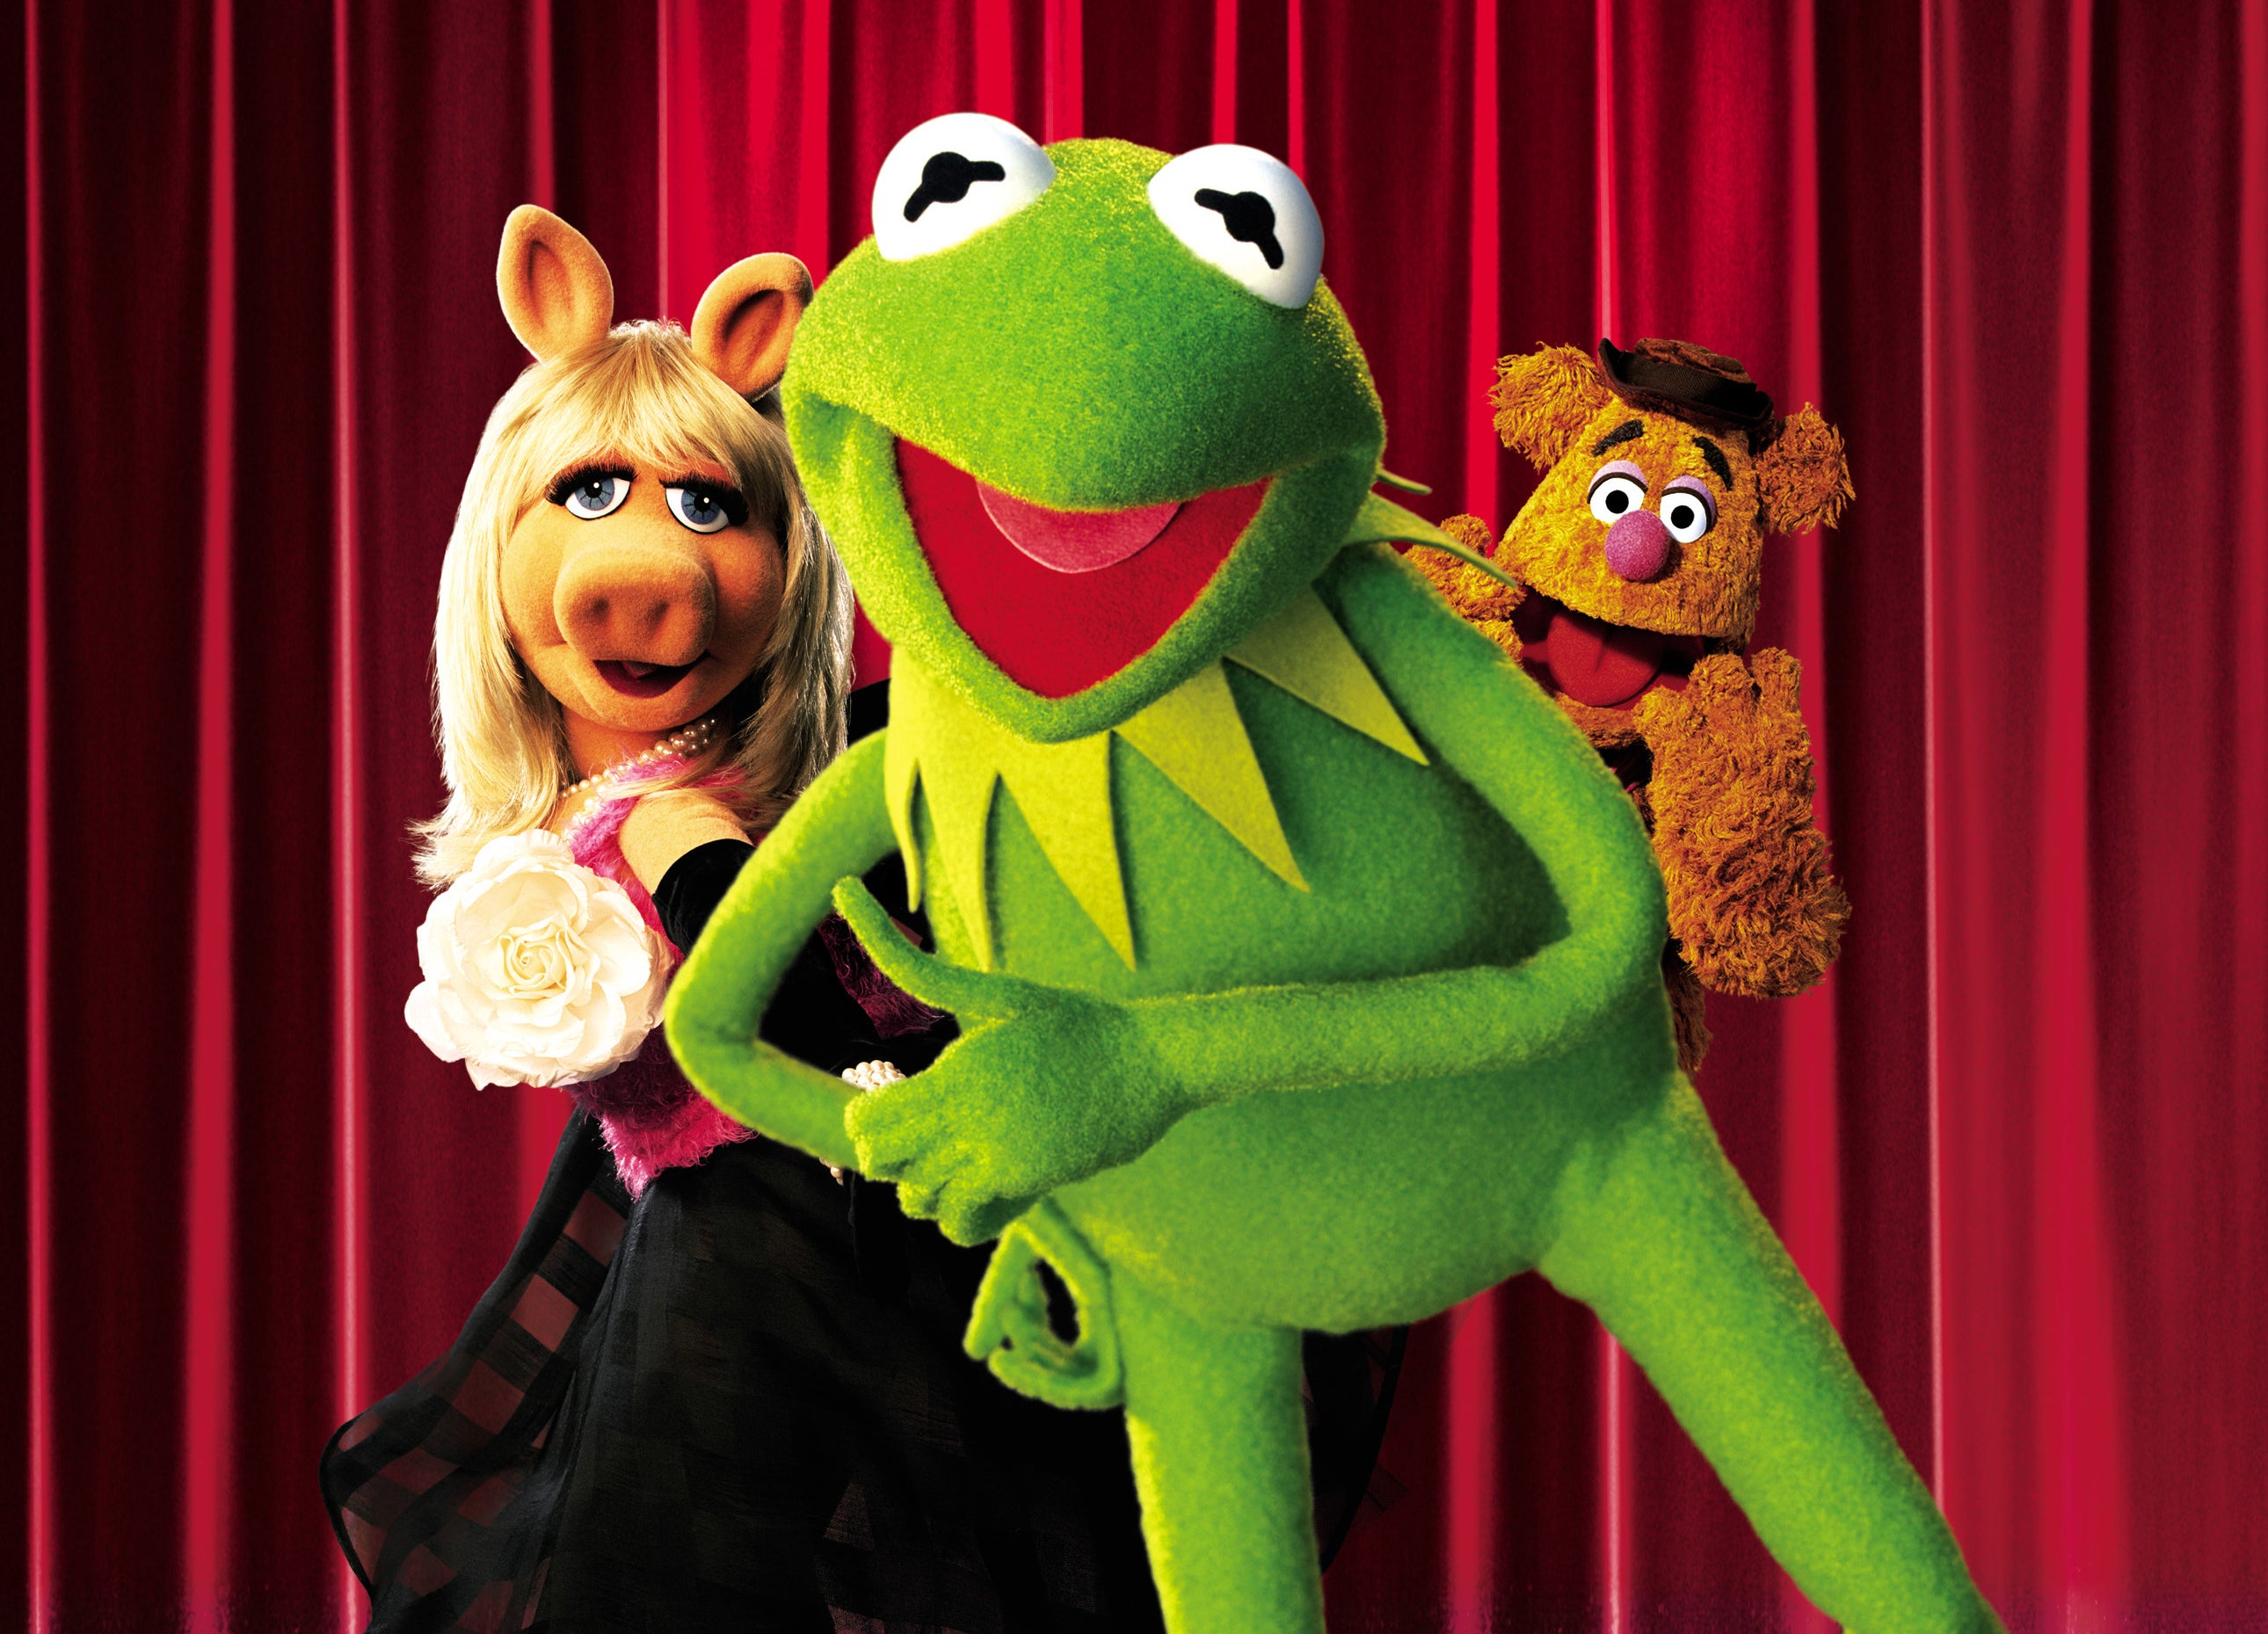 Kermit, Miss Piggy, and Fozzie Bear in front of a curtain